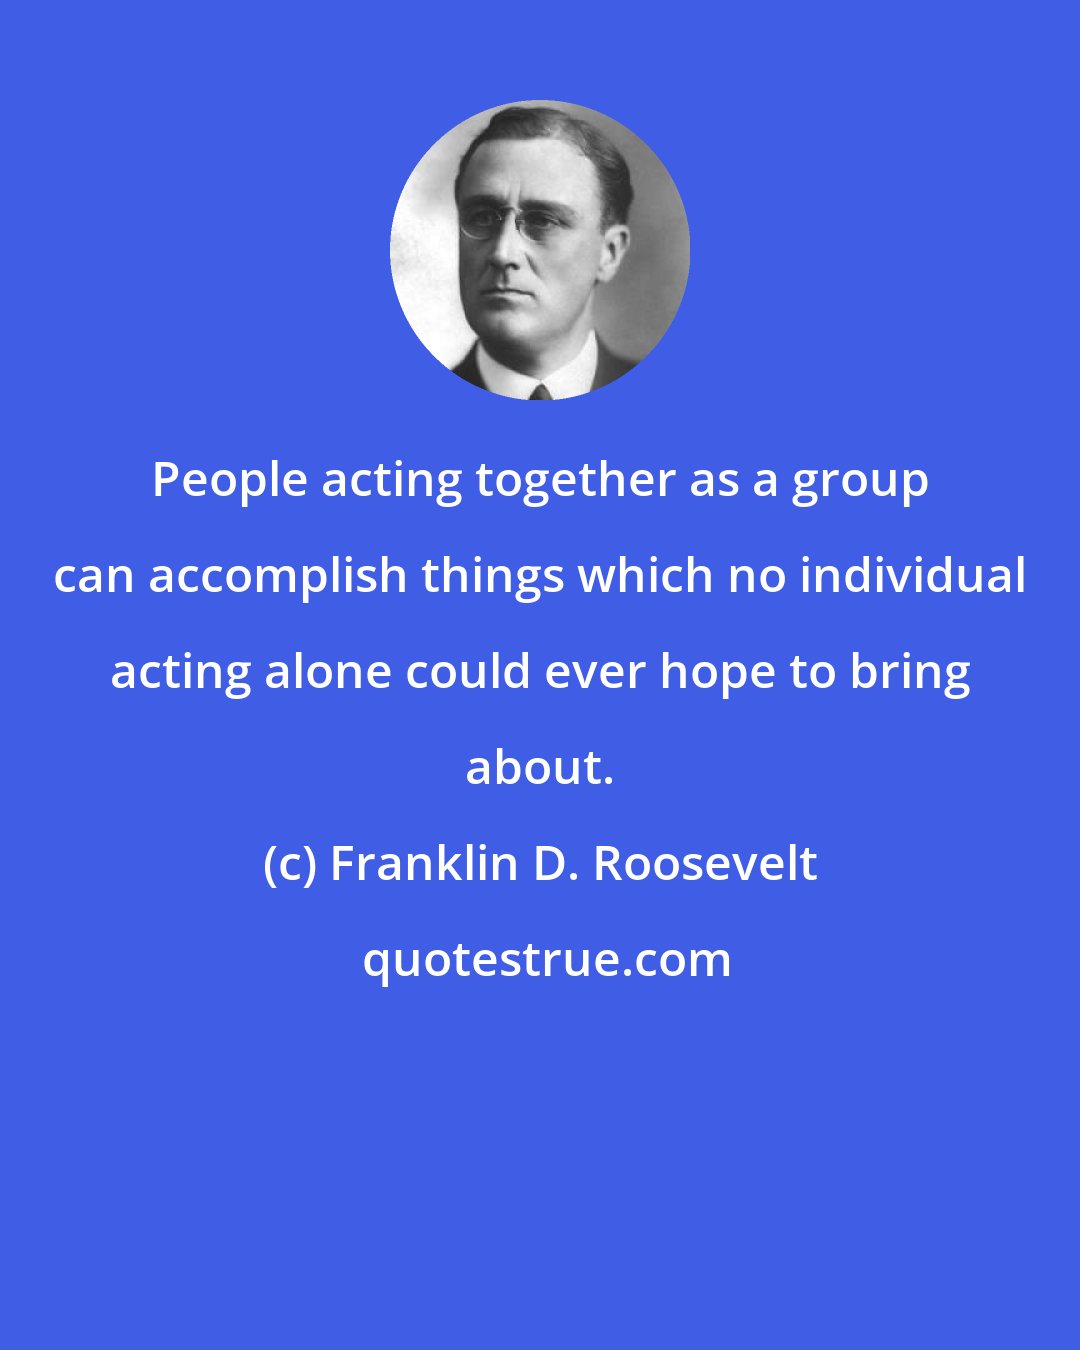 Franklin D. Roosevelt: People acting together as a group can accomplish things which no individual acting alone could ever hope to bring about.